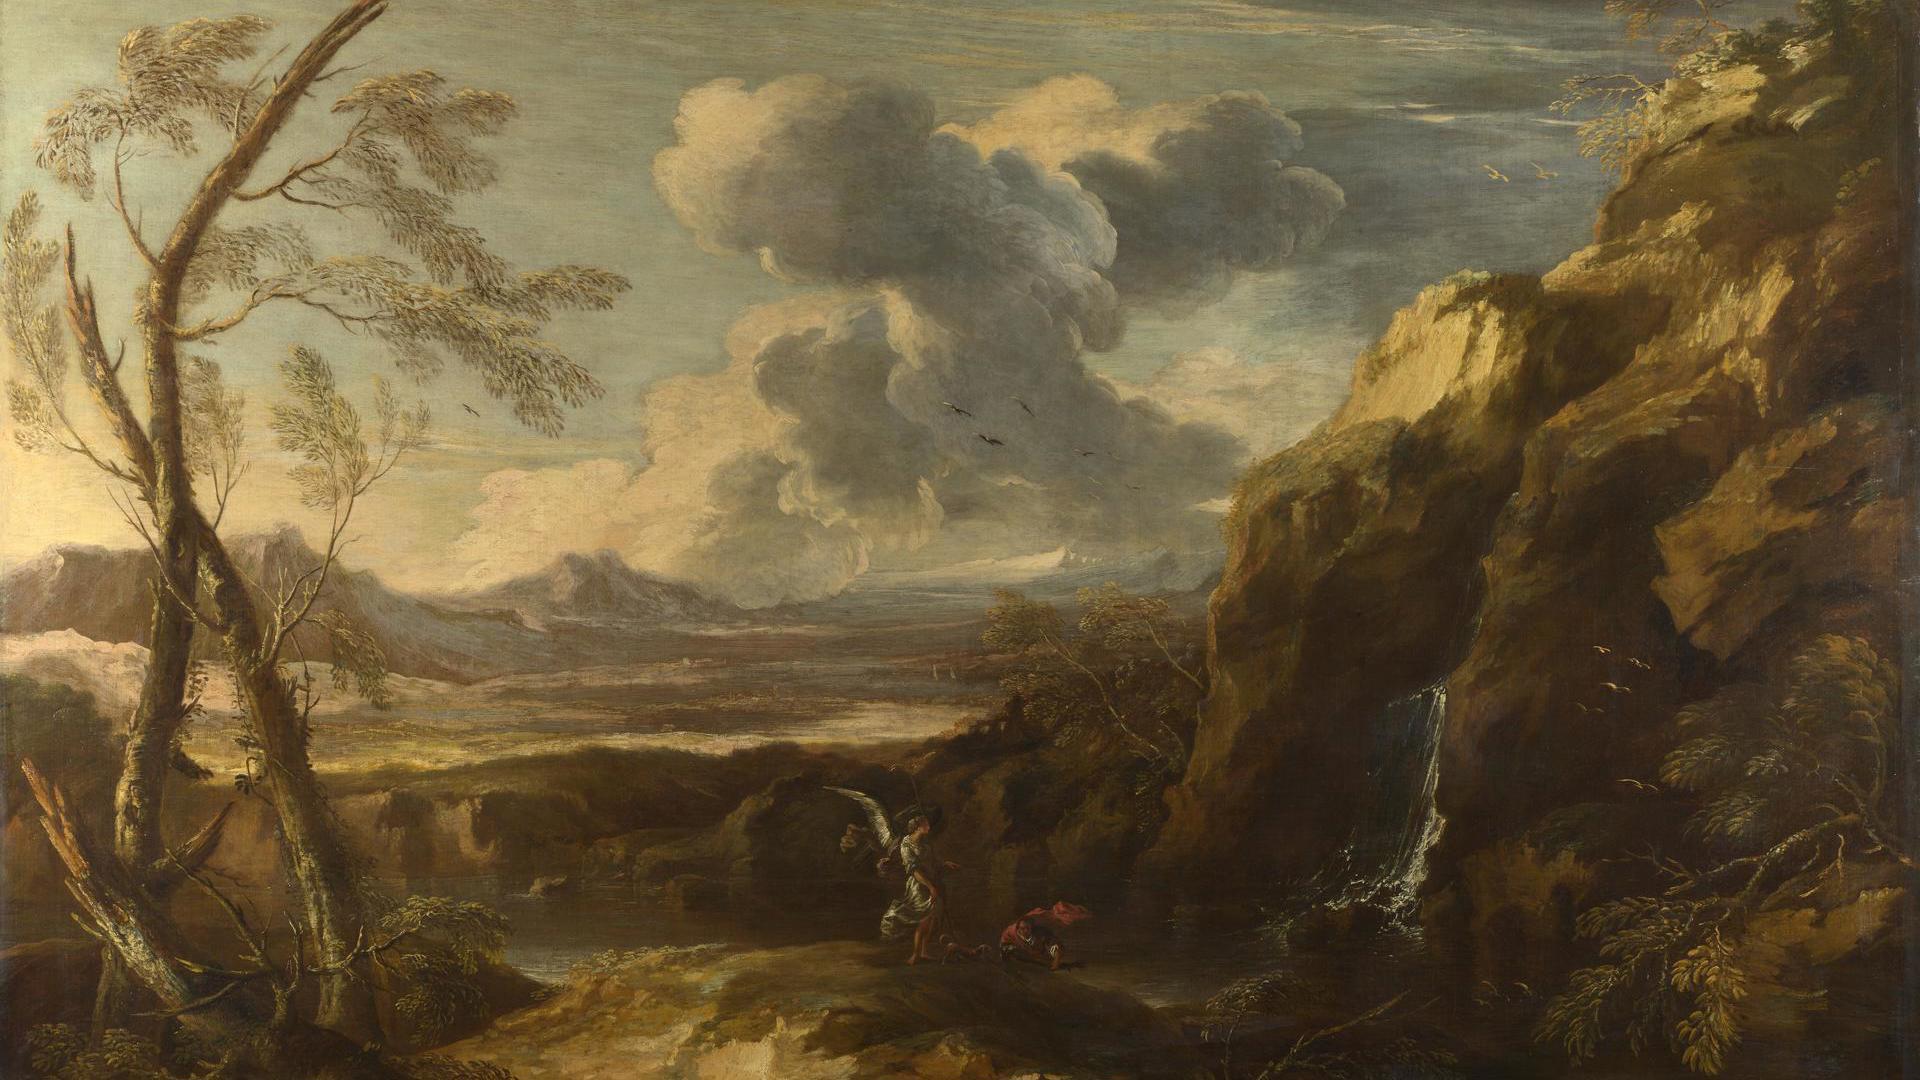 Landscape with Tobias and the Angel by Salvator Rosa